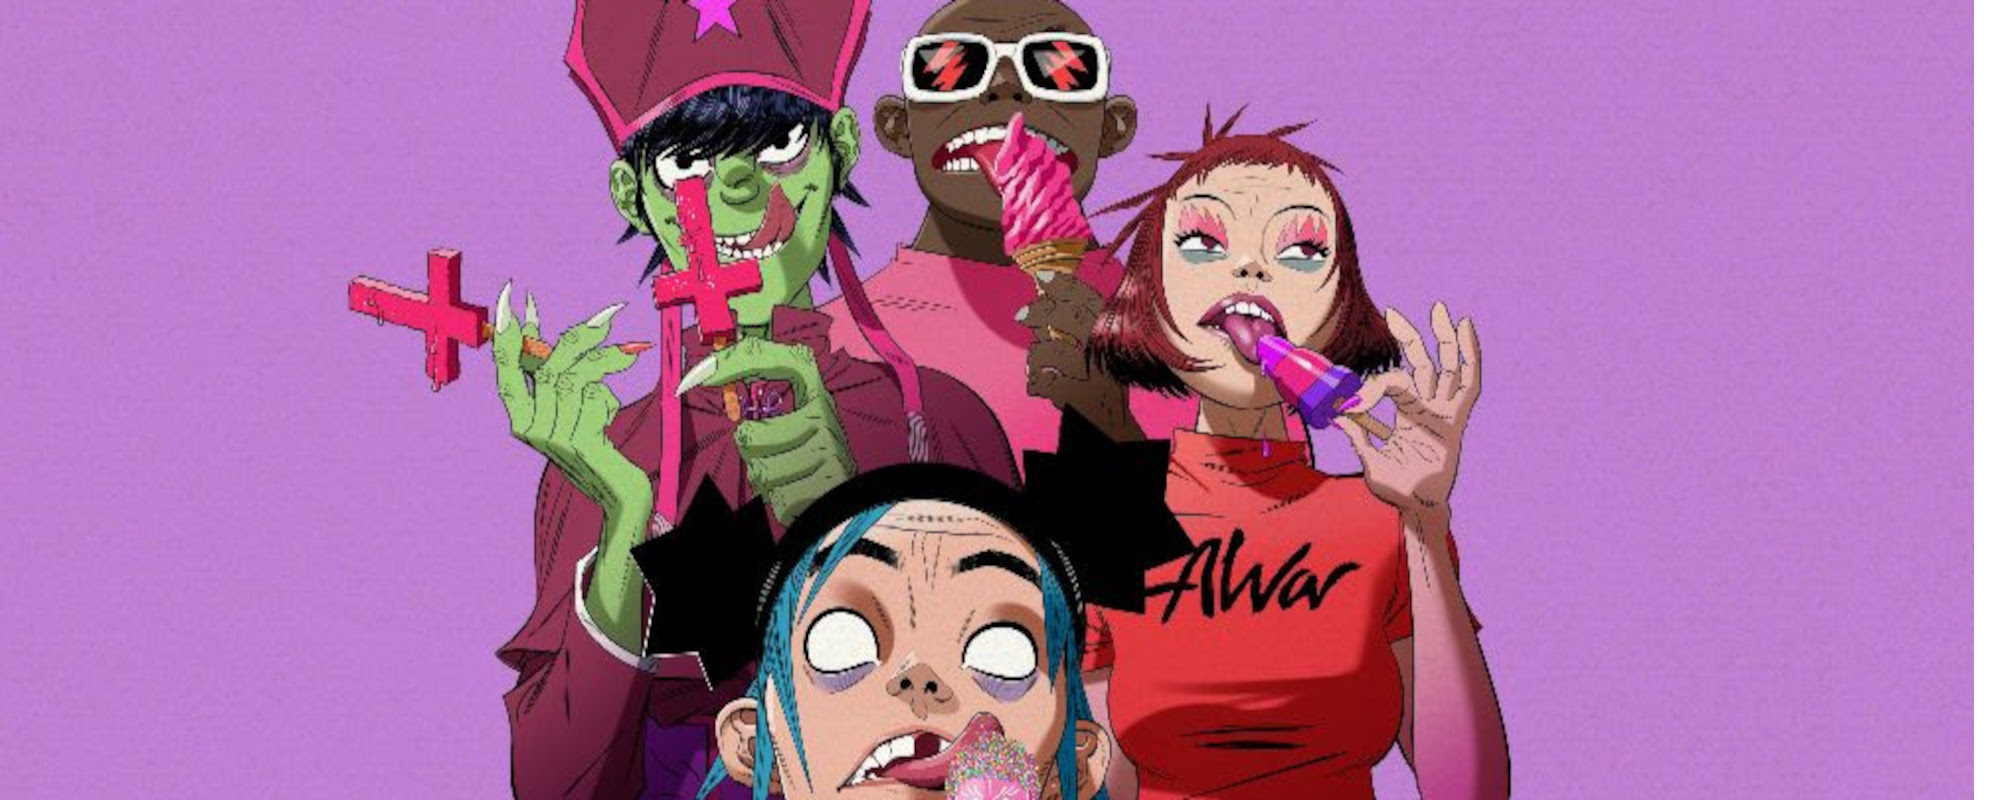 Gorillaz Release New Song Inspired by Meeting with Thai Princess, “Baby Queen”